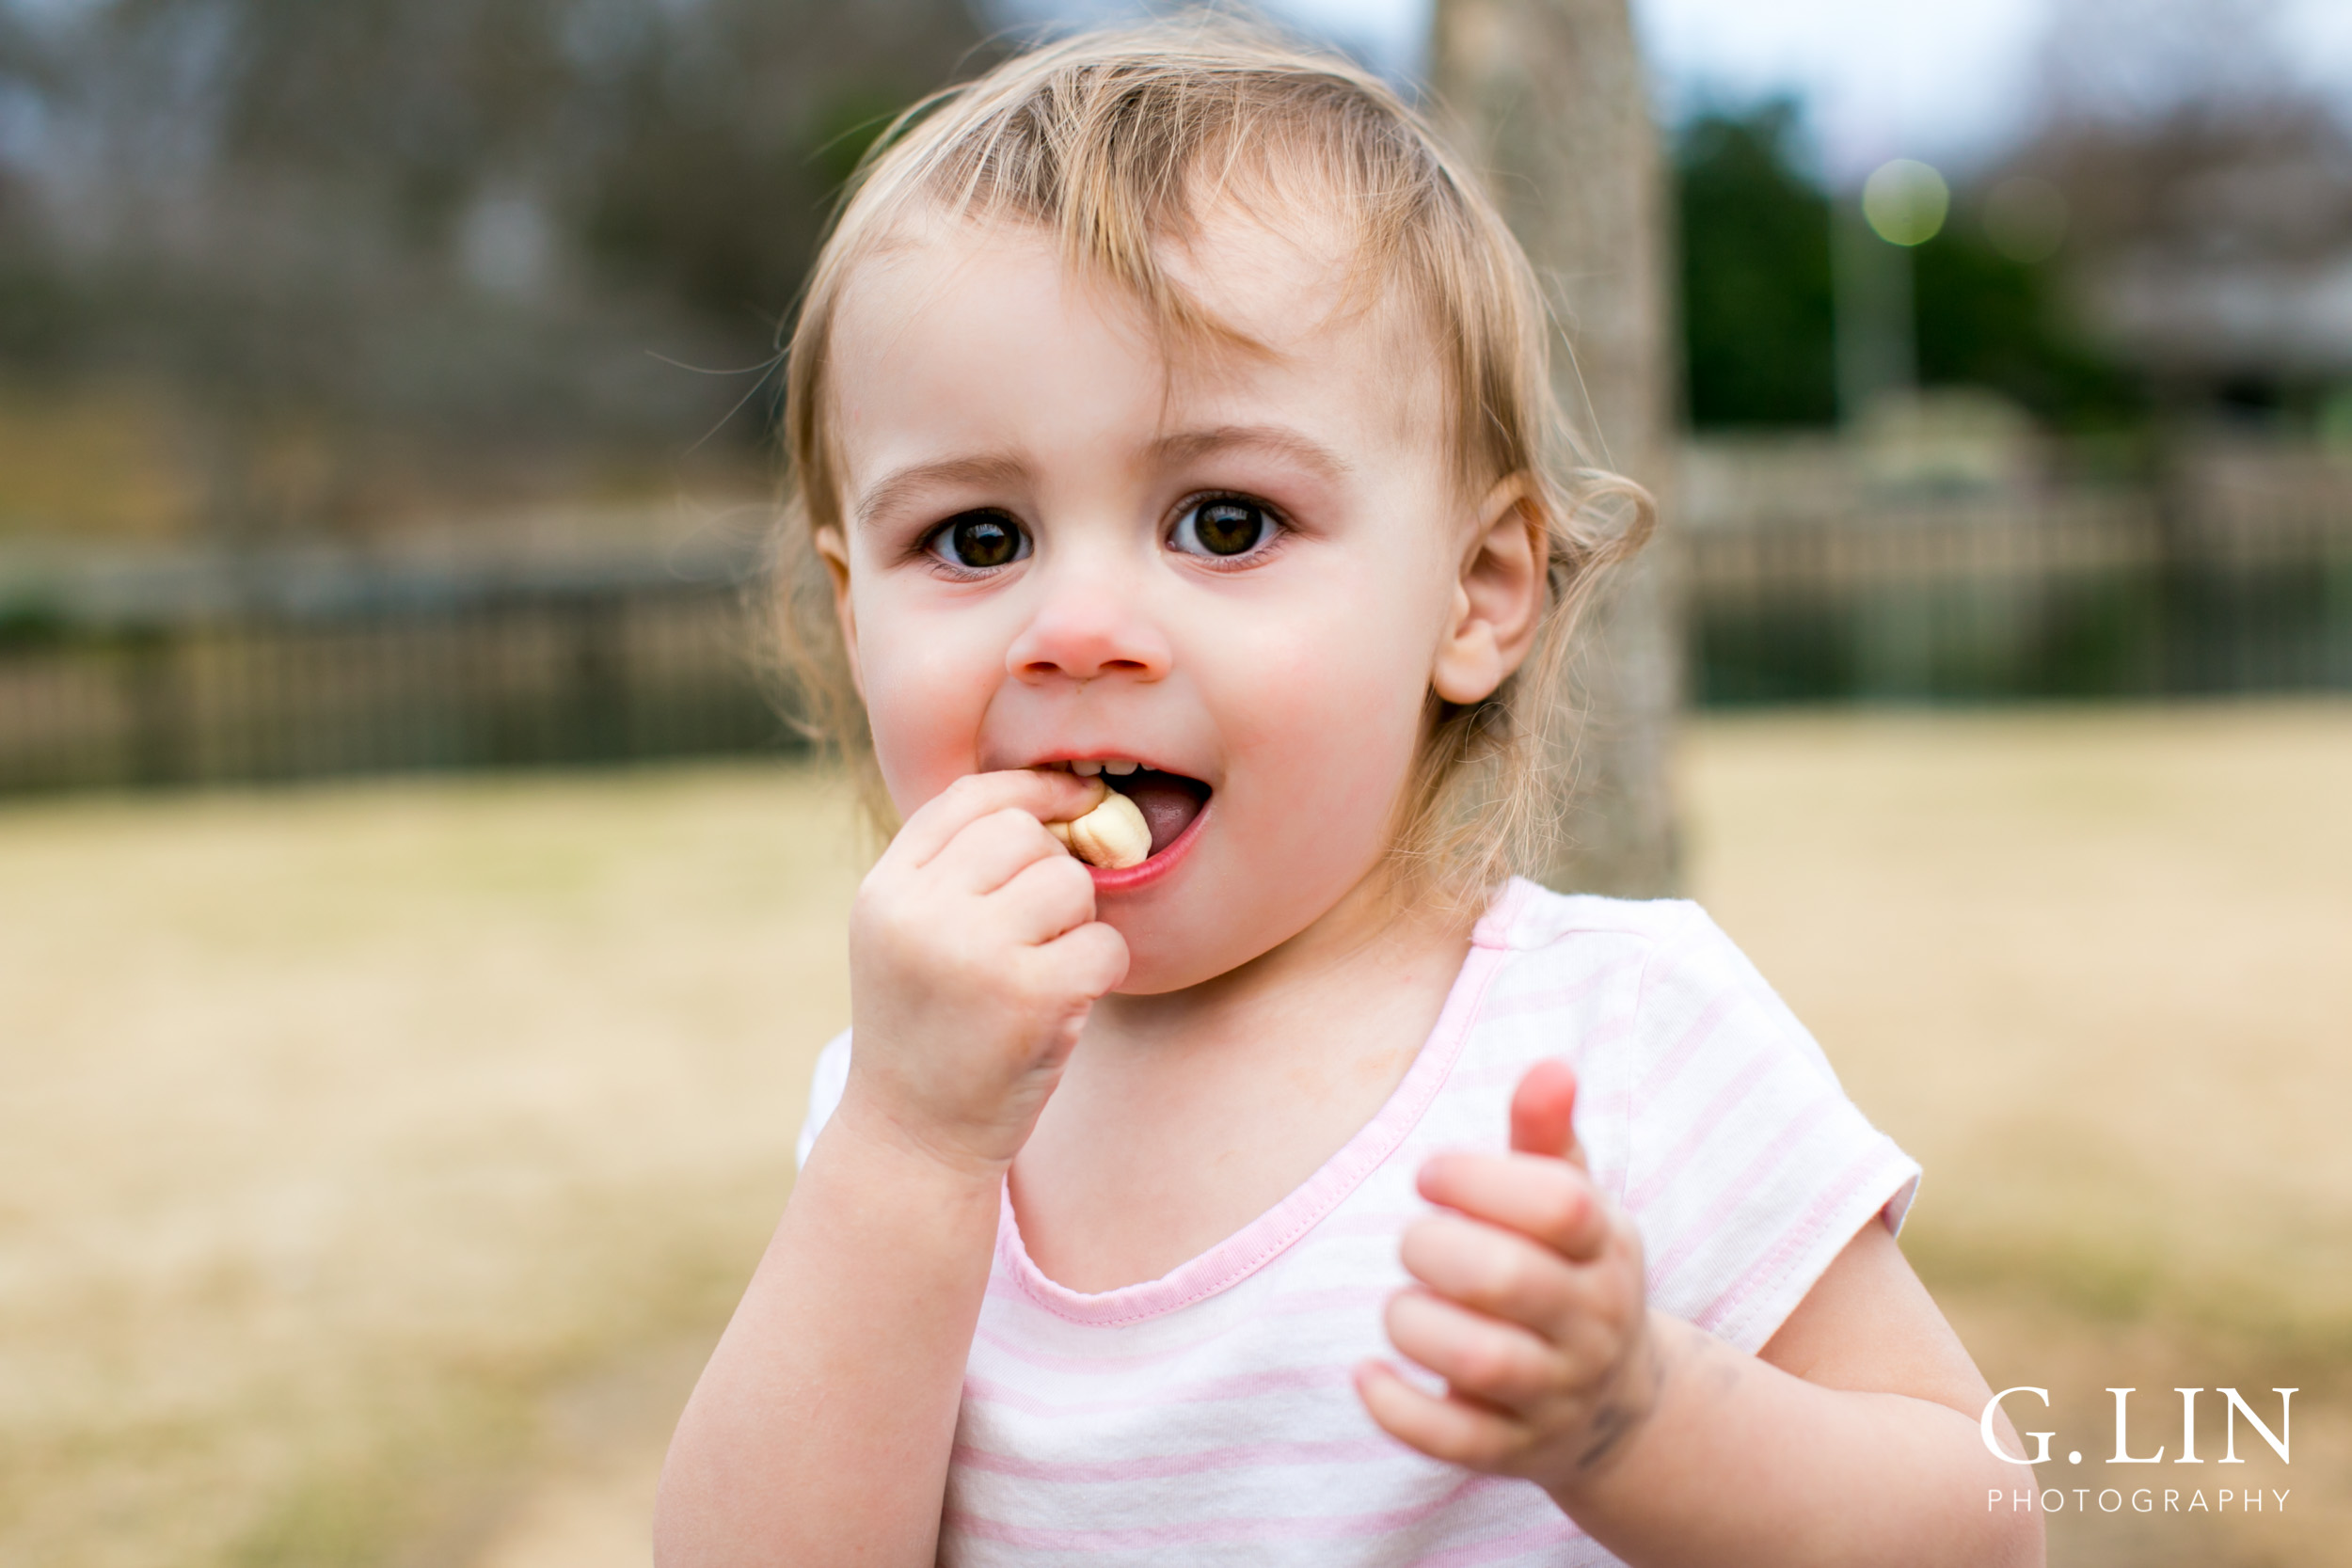 Raleigh Family Photographer | G. Lin Photography | Girl eating marshmallow sitting on the ground